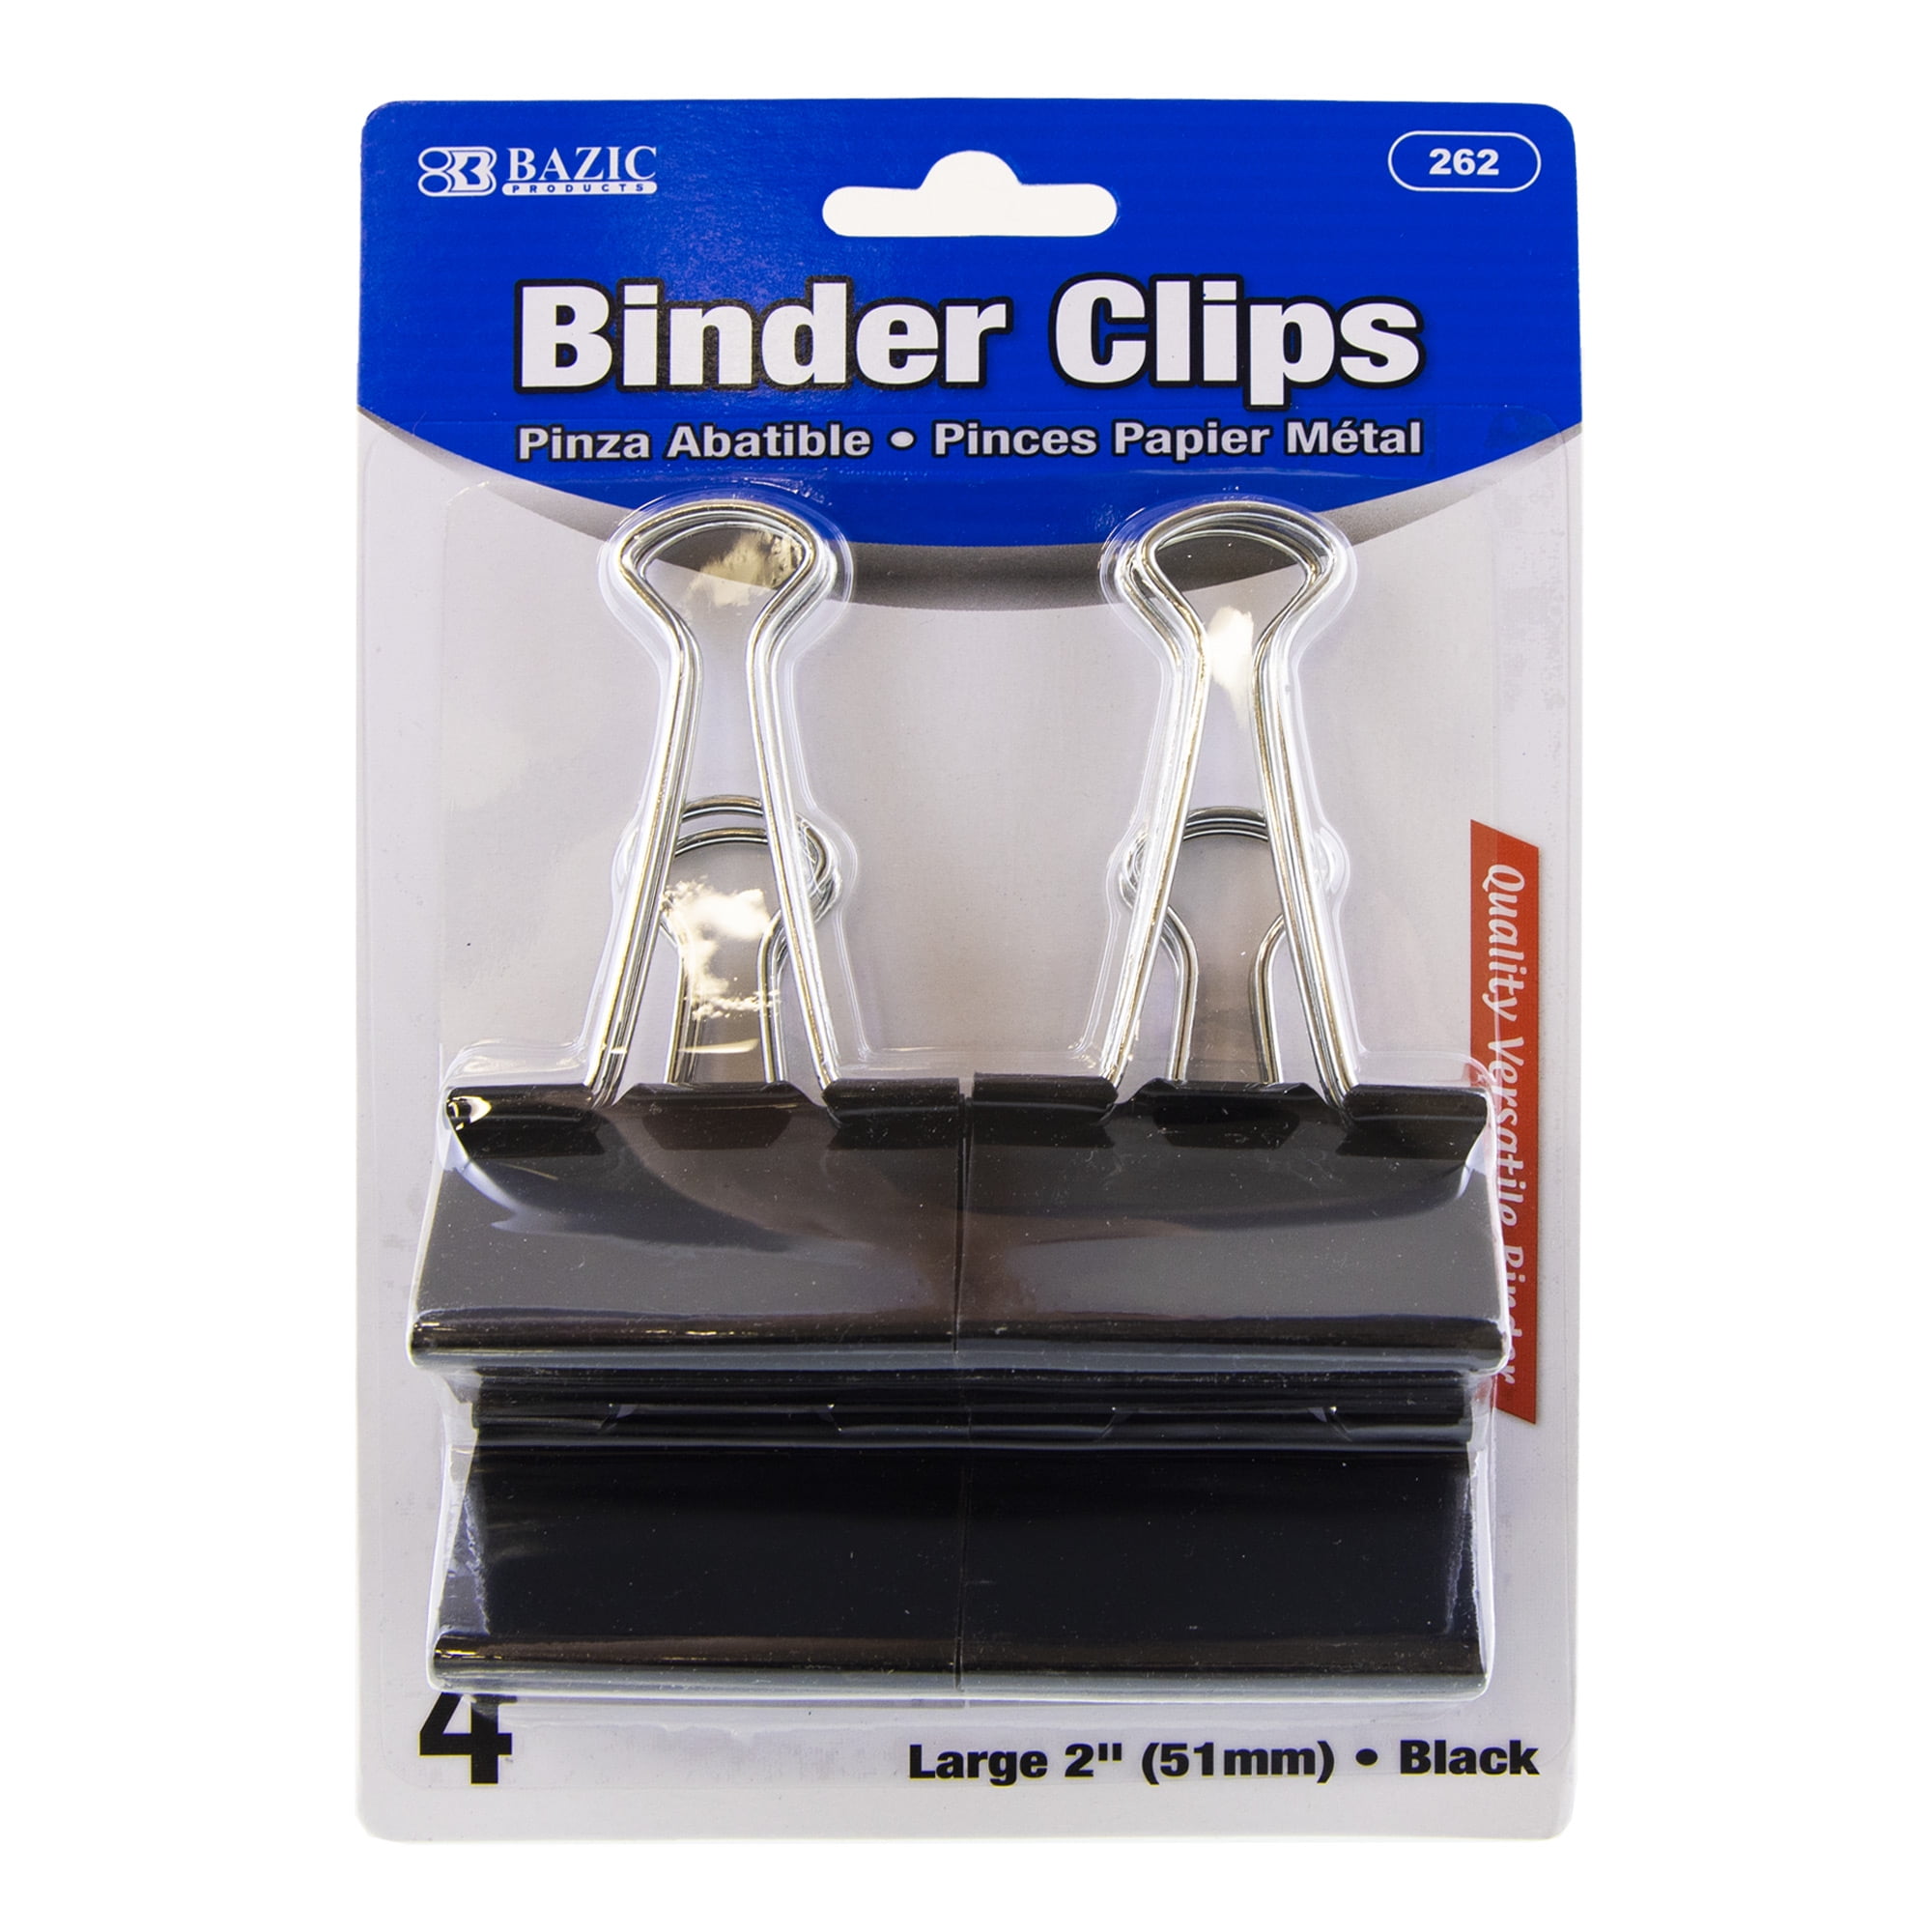 Coofficer Extra Large Binder Clips 2-Inch (24 Pack), Big Paper Clamps for Office Supplies, Black